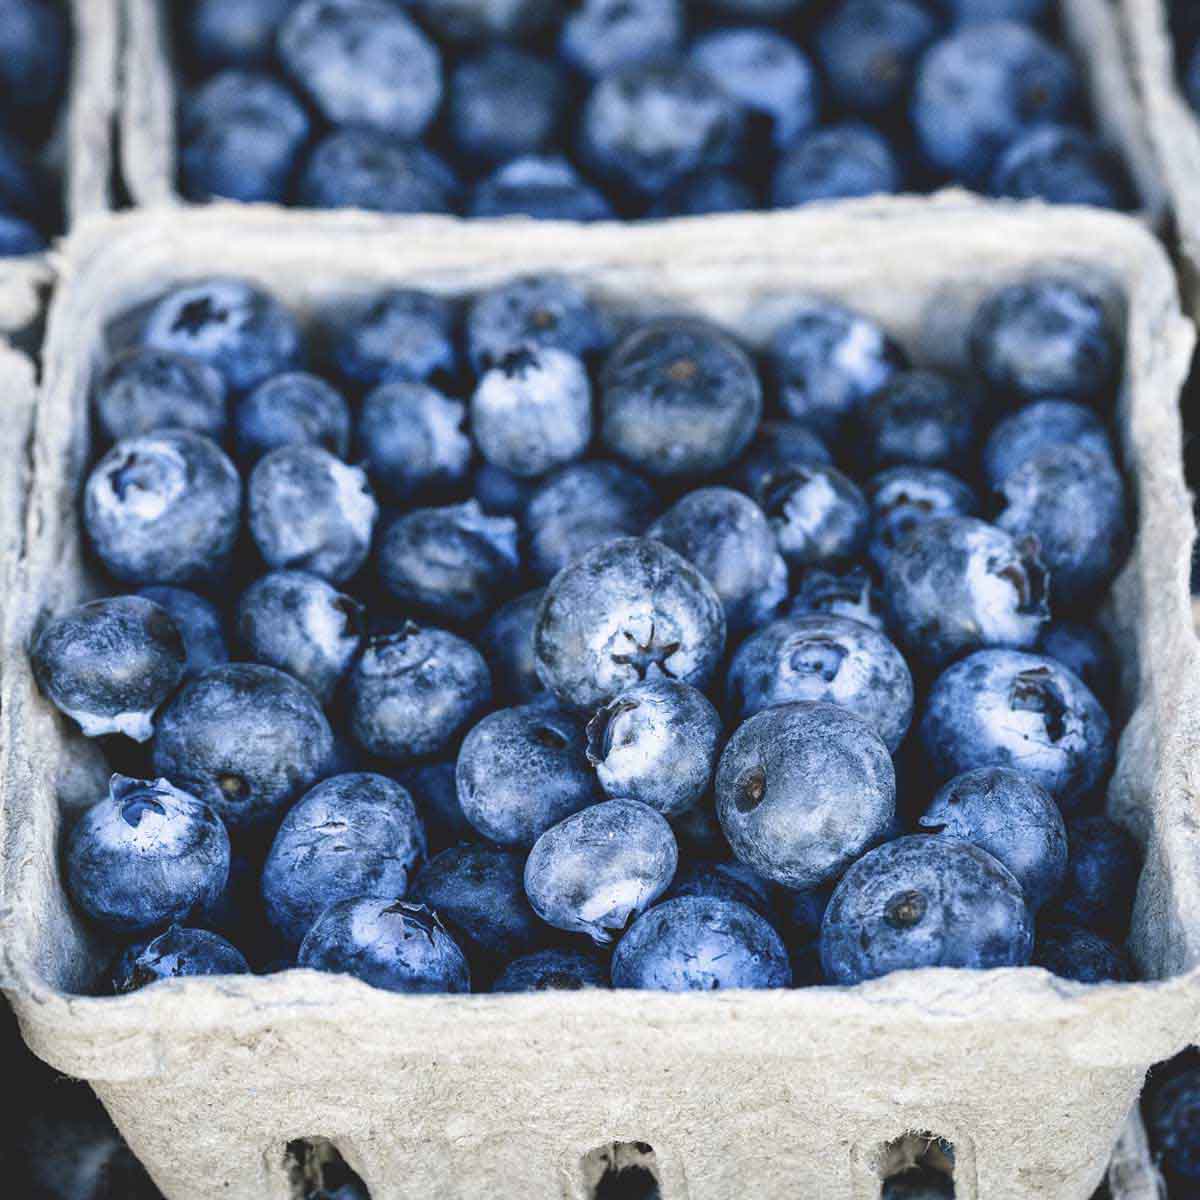 Carton full of ripe blueberries ready to eat.